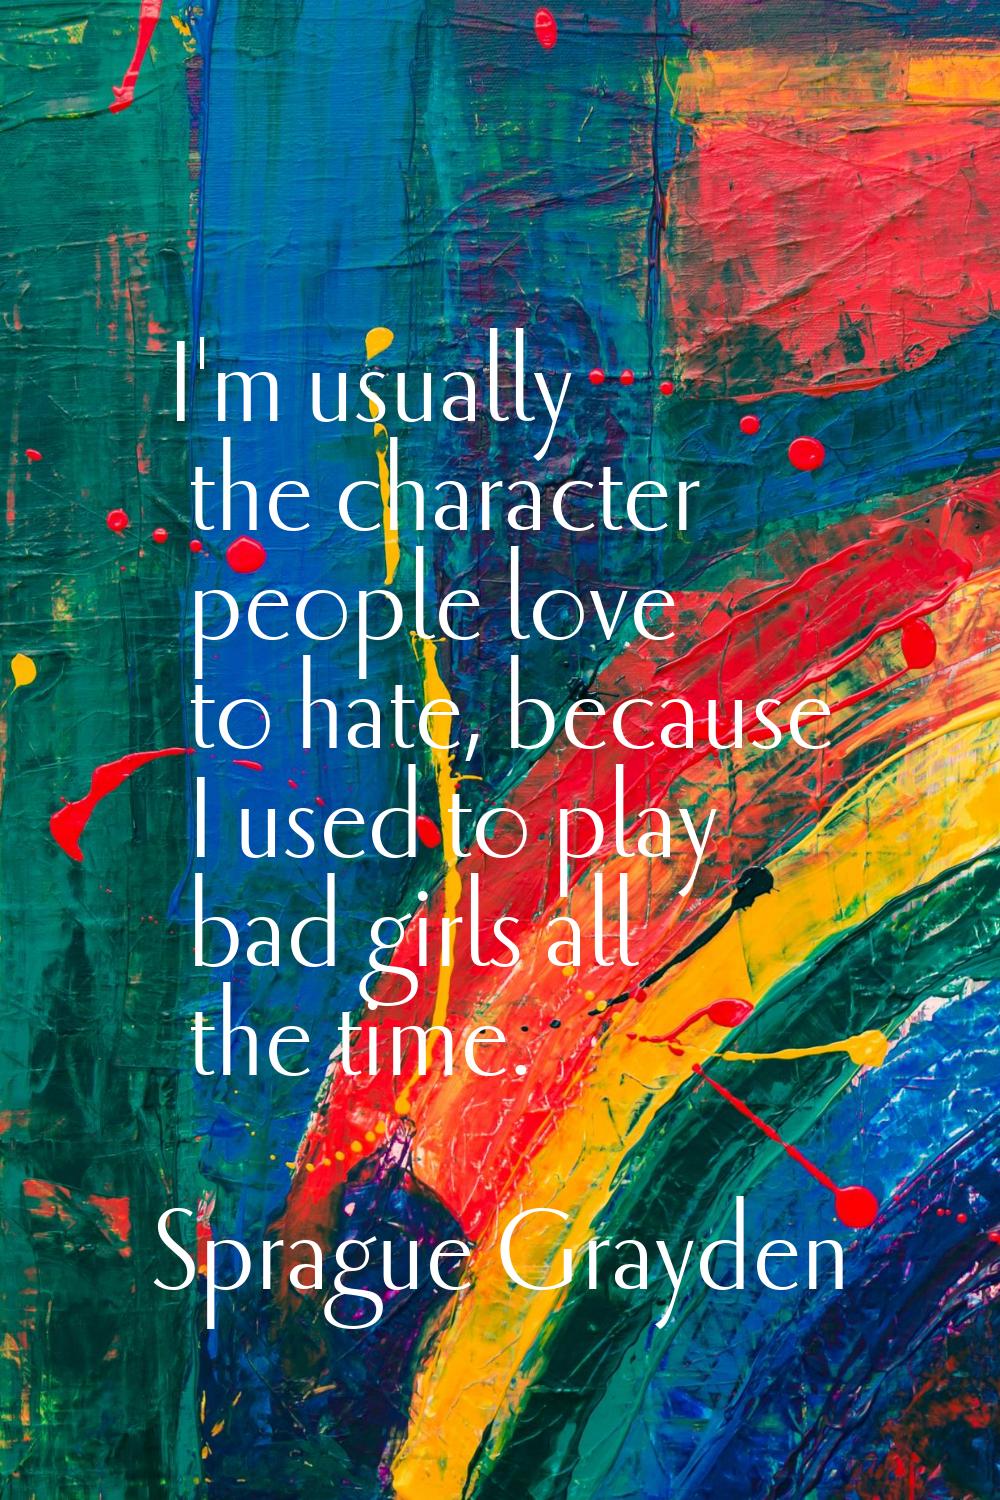 I'm usually the character people love to hate, because I used to play bad girls all the time.